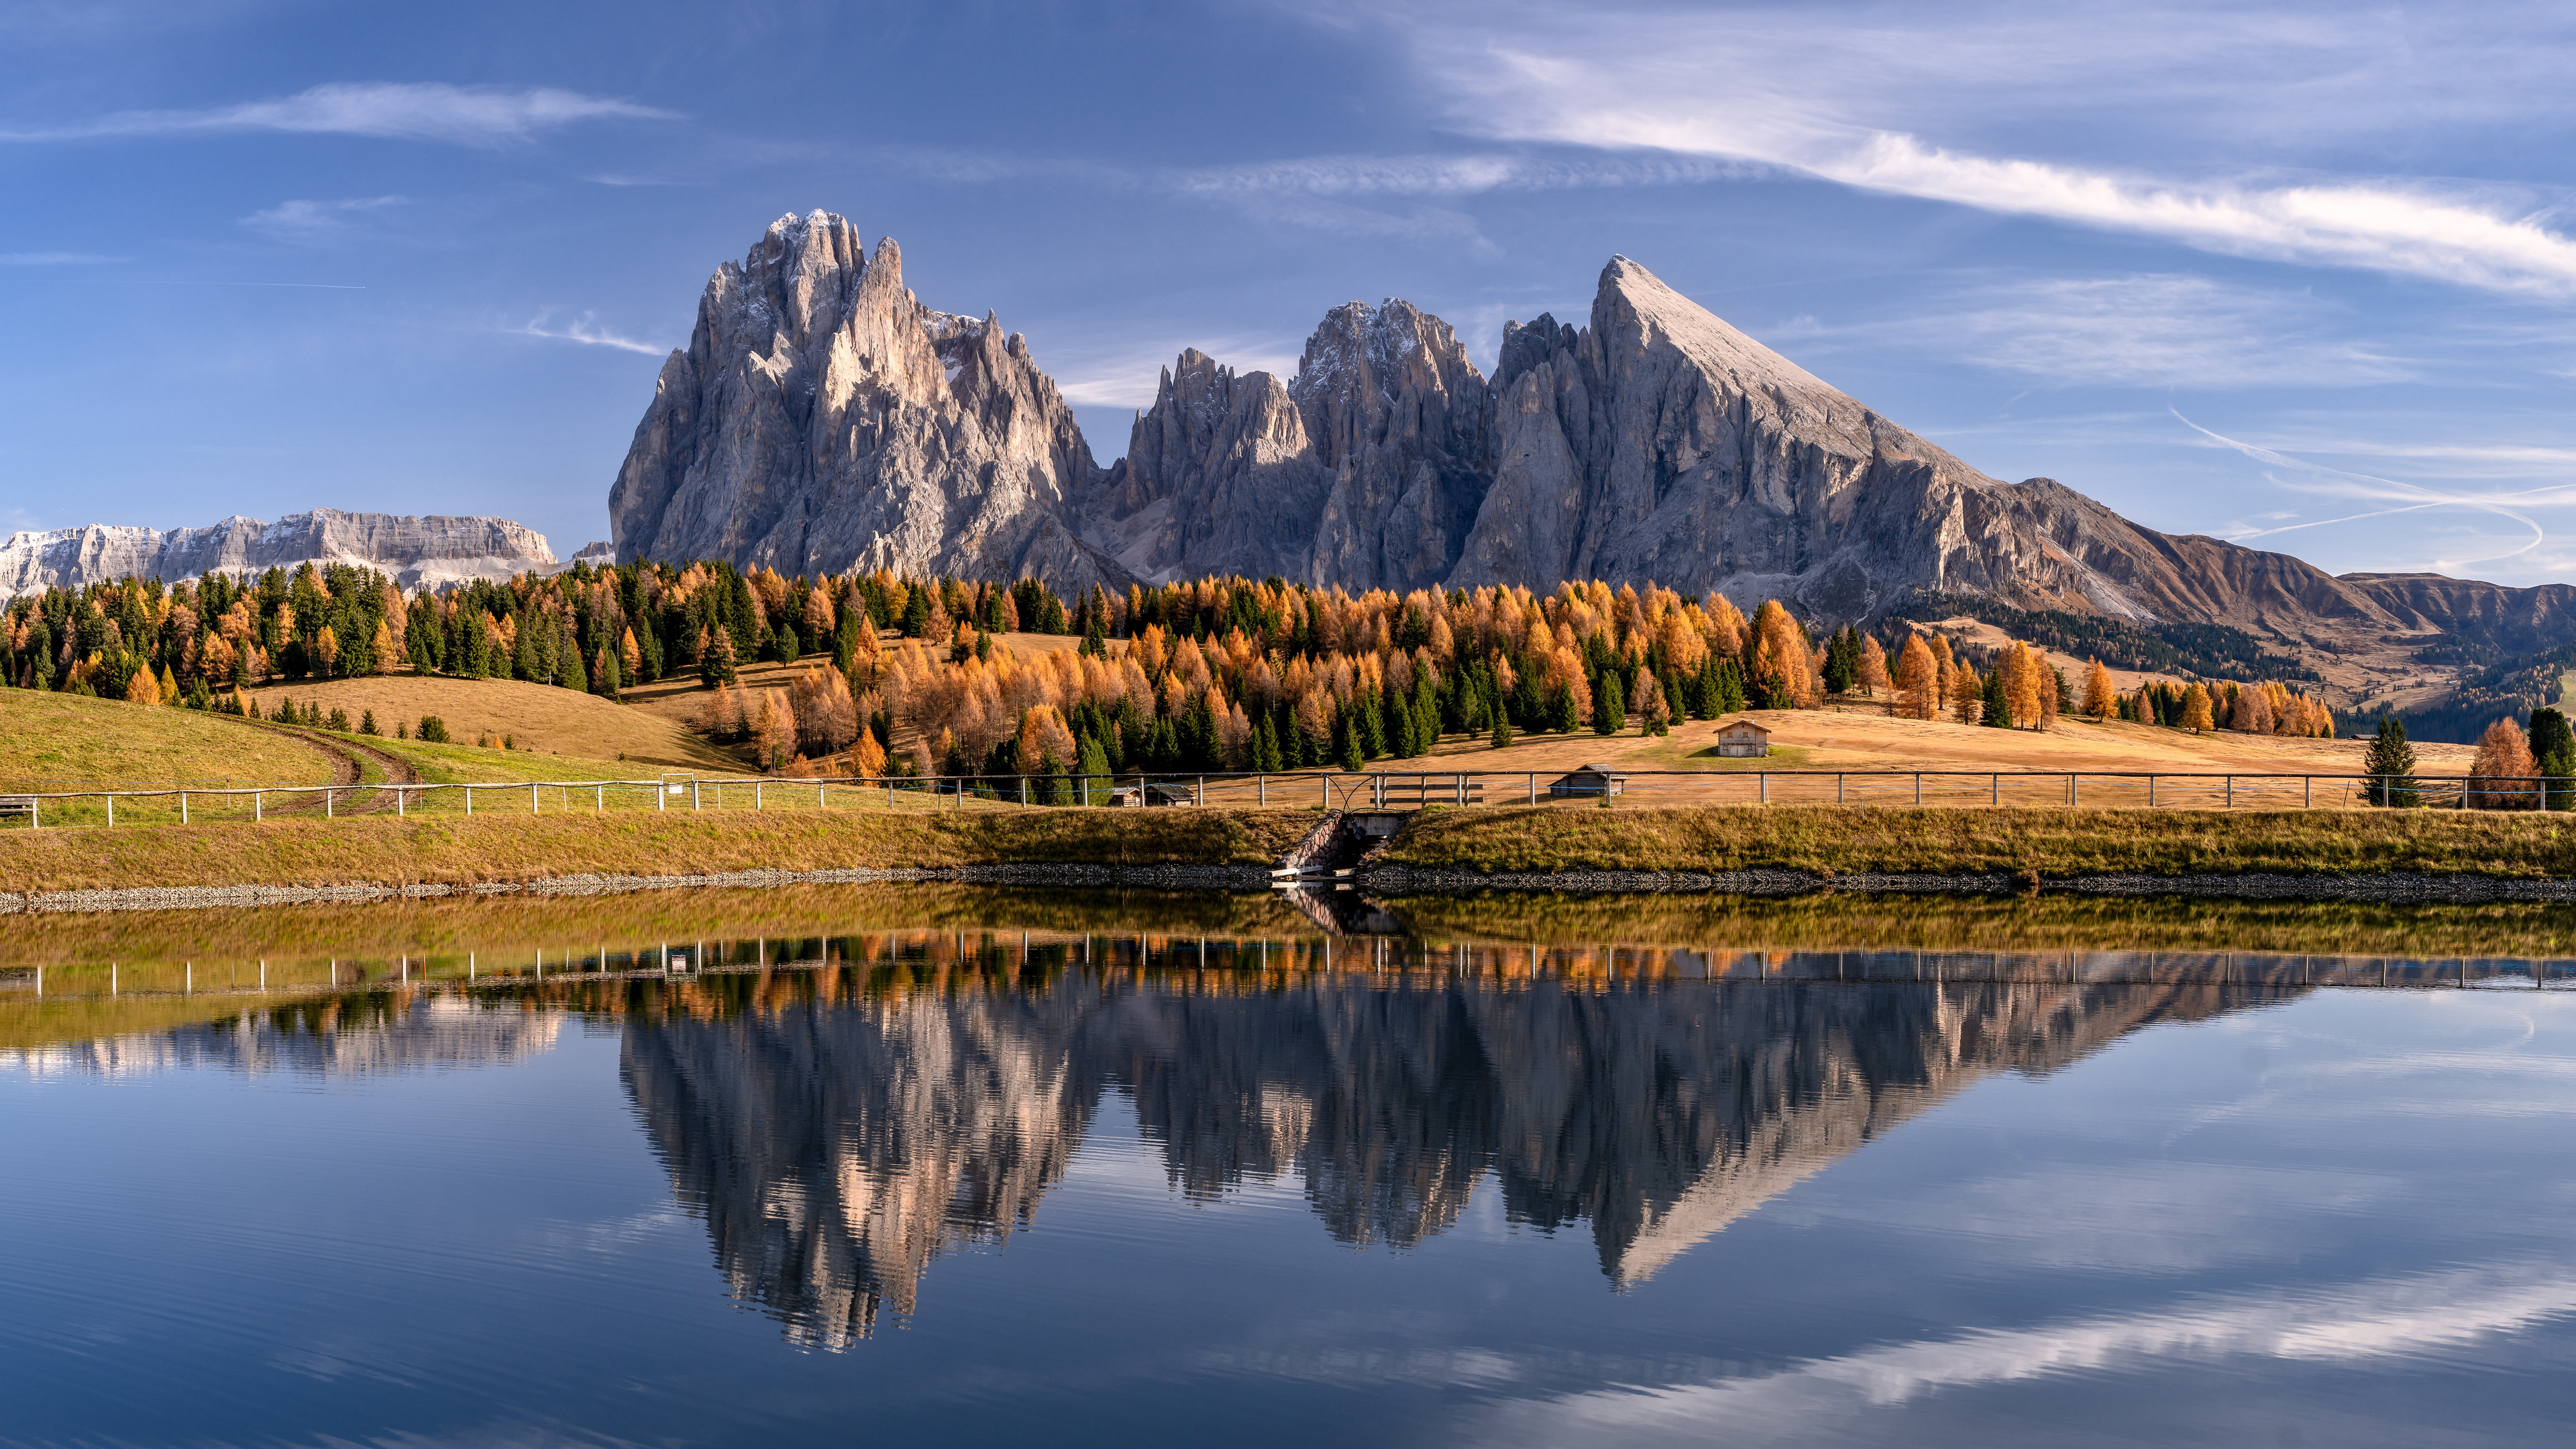 General 3840x2160 nature landscape Italy Dolomites mountains lake reflection forest water clouds sky fall